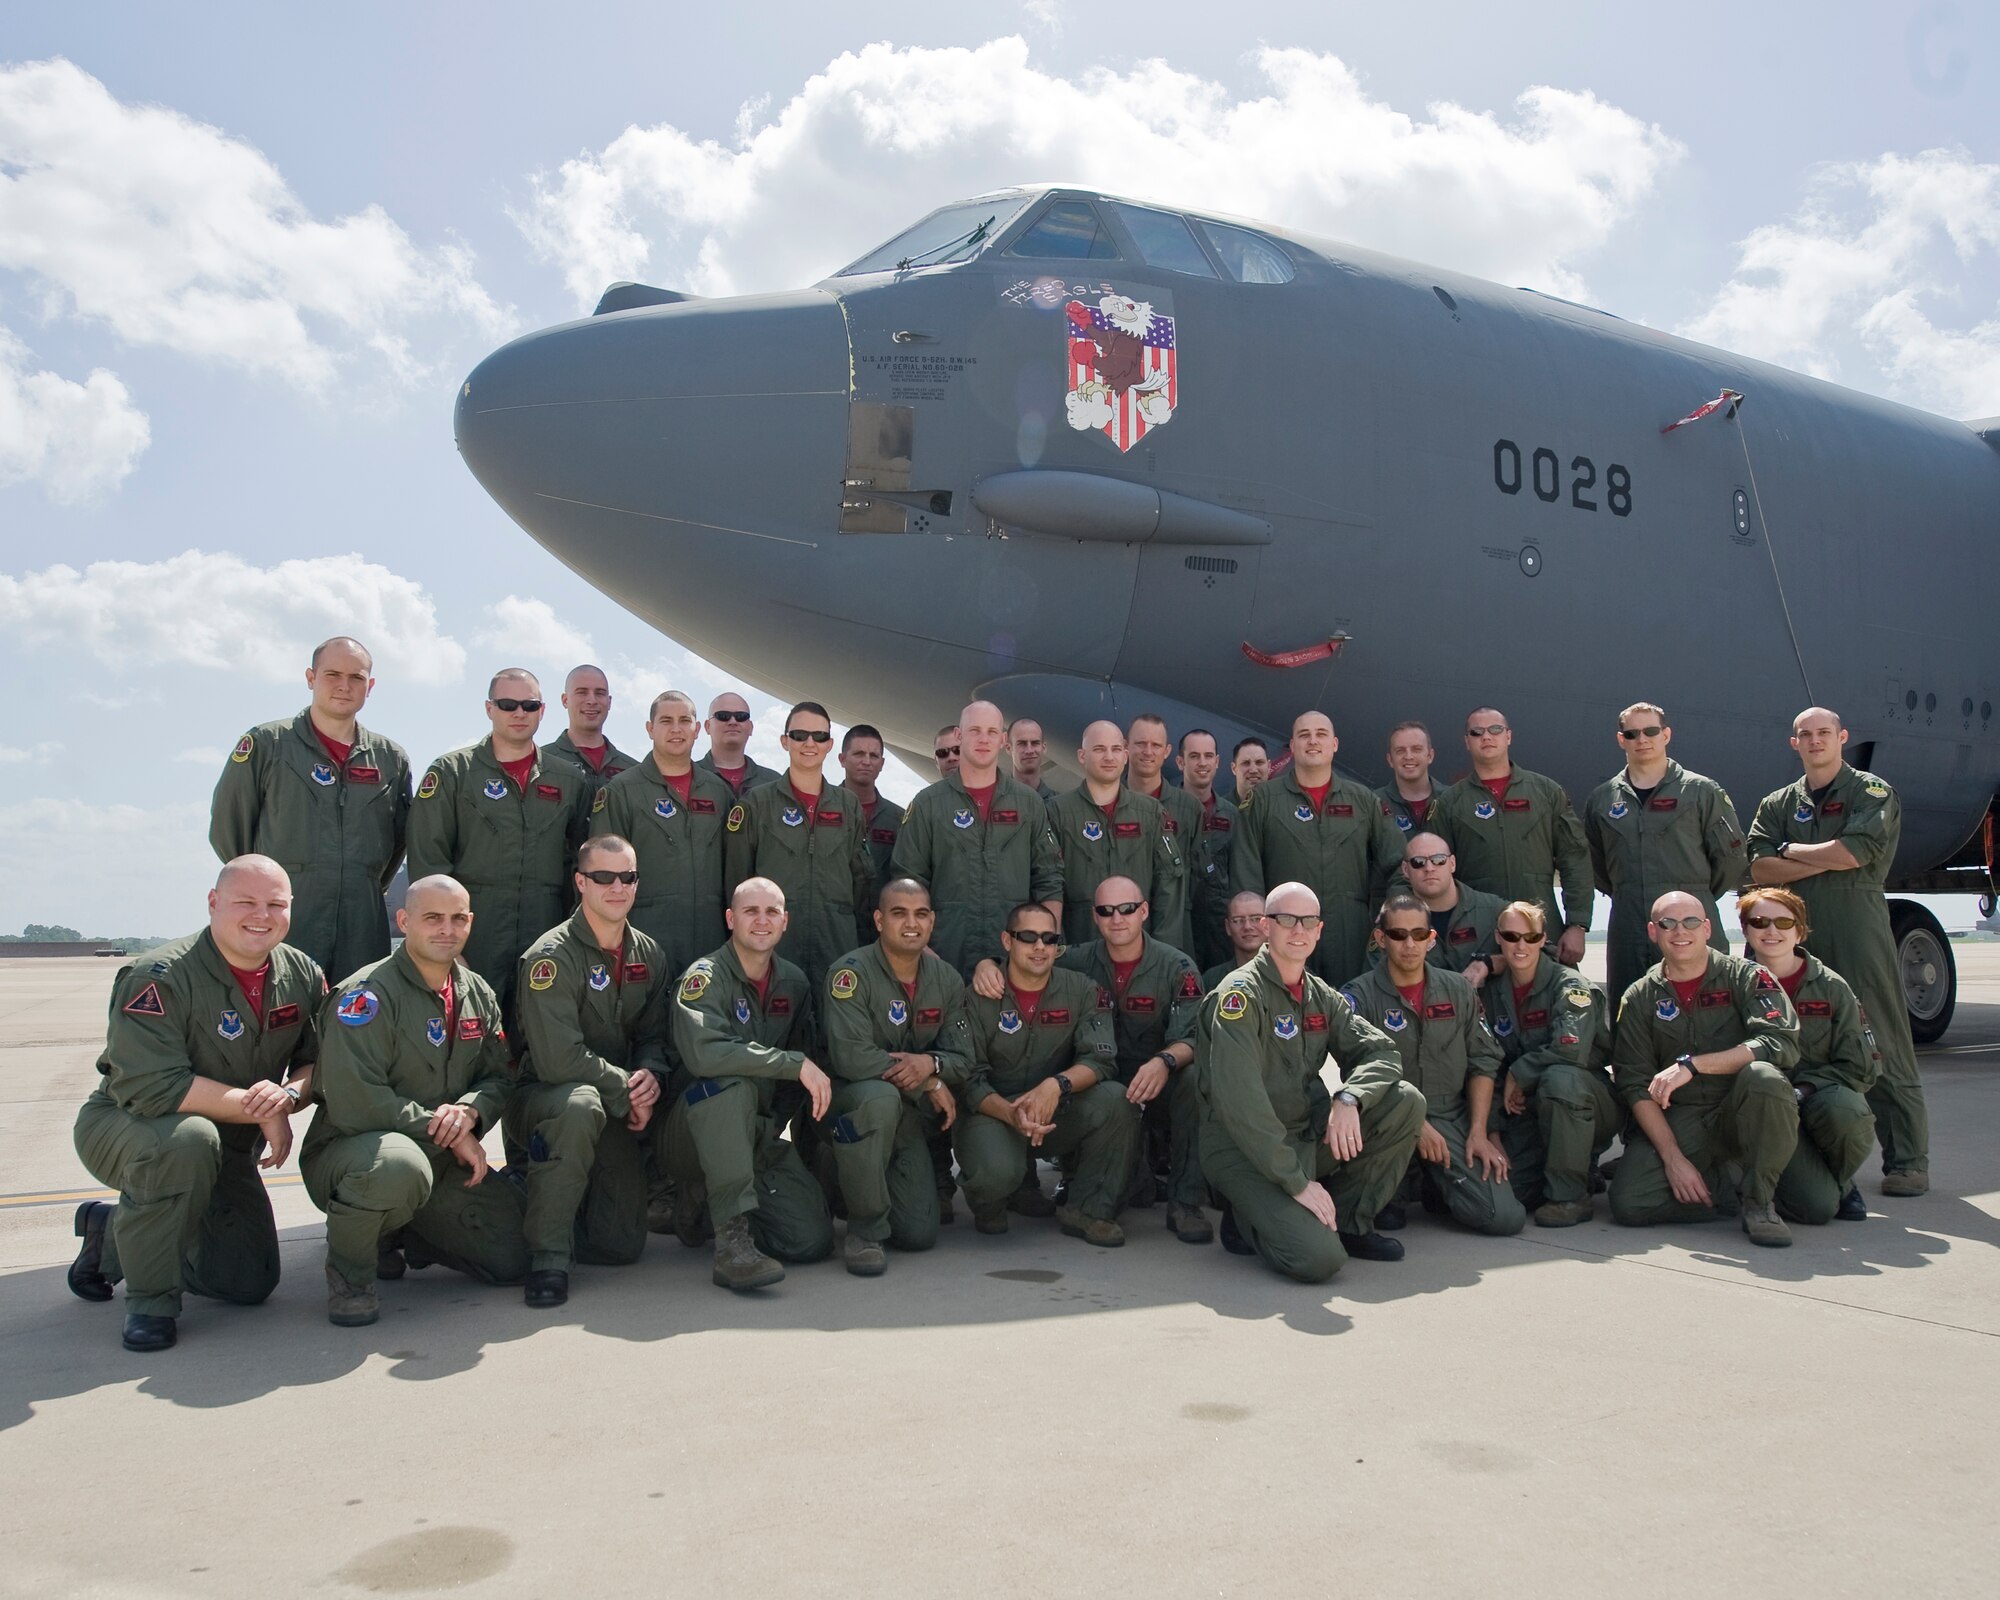 BARKSDALE AIR FORCE BASE, La. -- Capt. Eric Schmidt (front), a B-52 pilot with the 96th Bomb Squadron, poses with several other Airmen from his squadron July 23. Captain Schmidt is undergoing chemotherapy for stomach cancer, and several fellow Airmen shaved their heads to show their support. (U.S. Air Force photo by Senior Airman Chad Warren) (RELEASED)